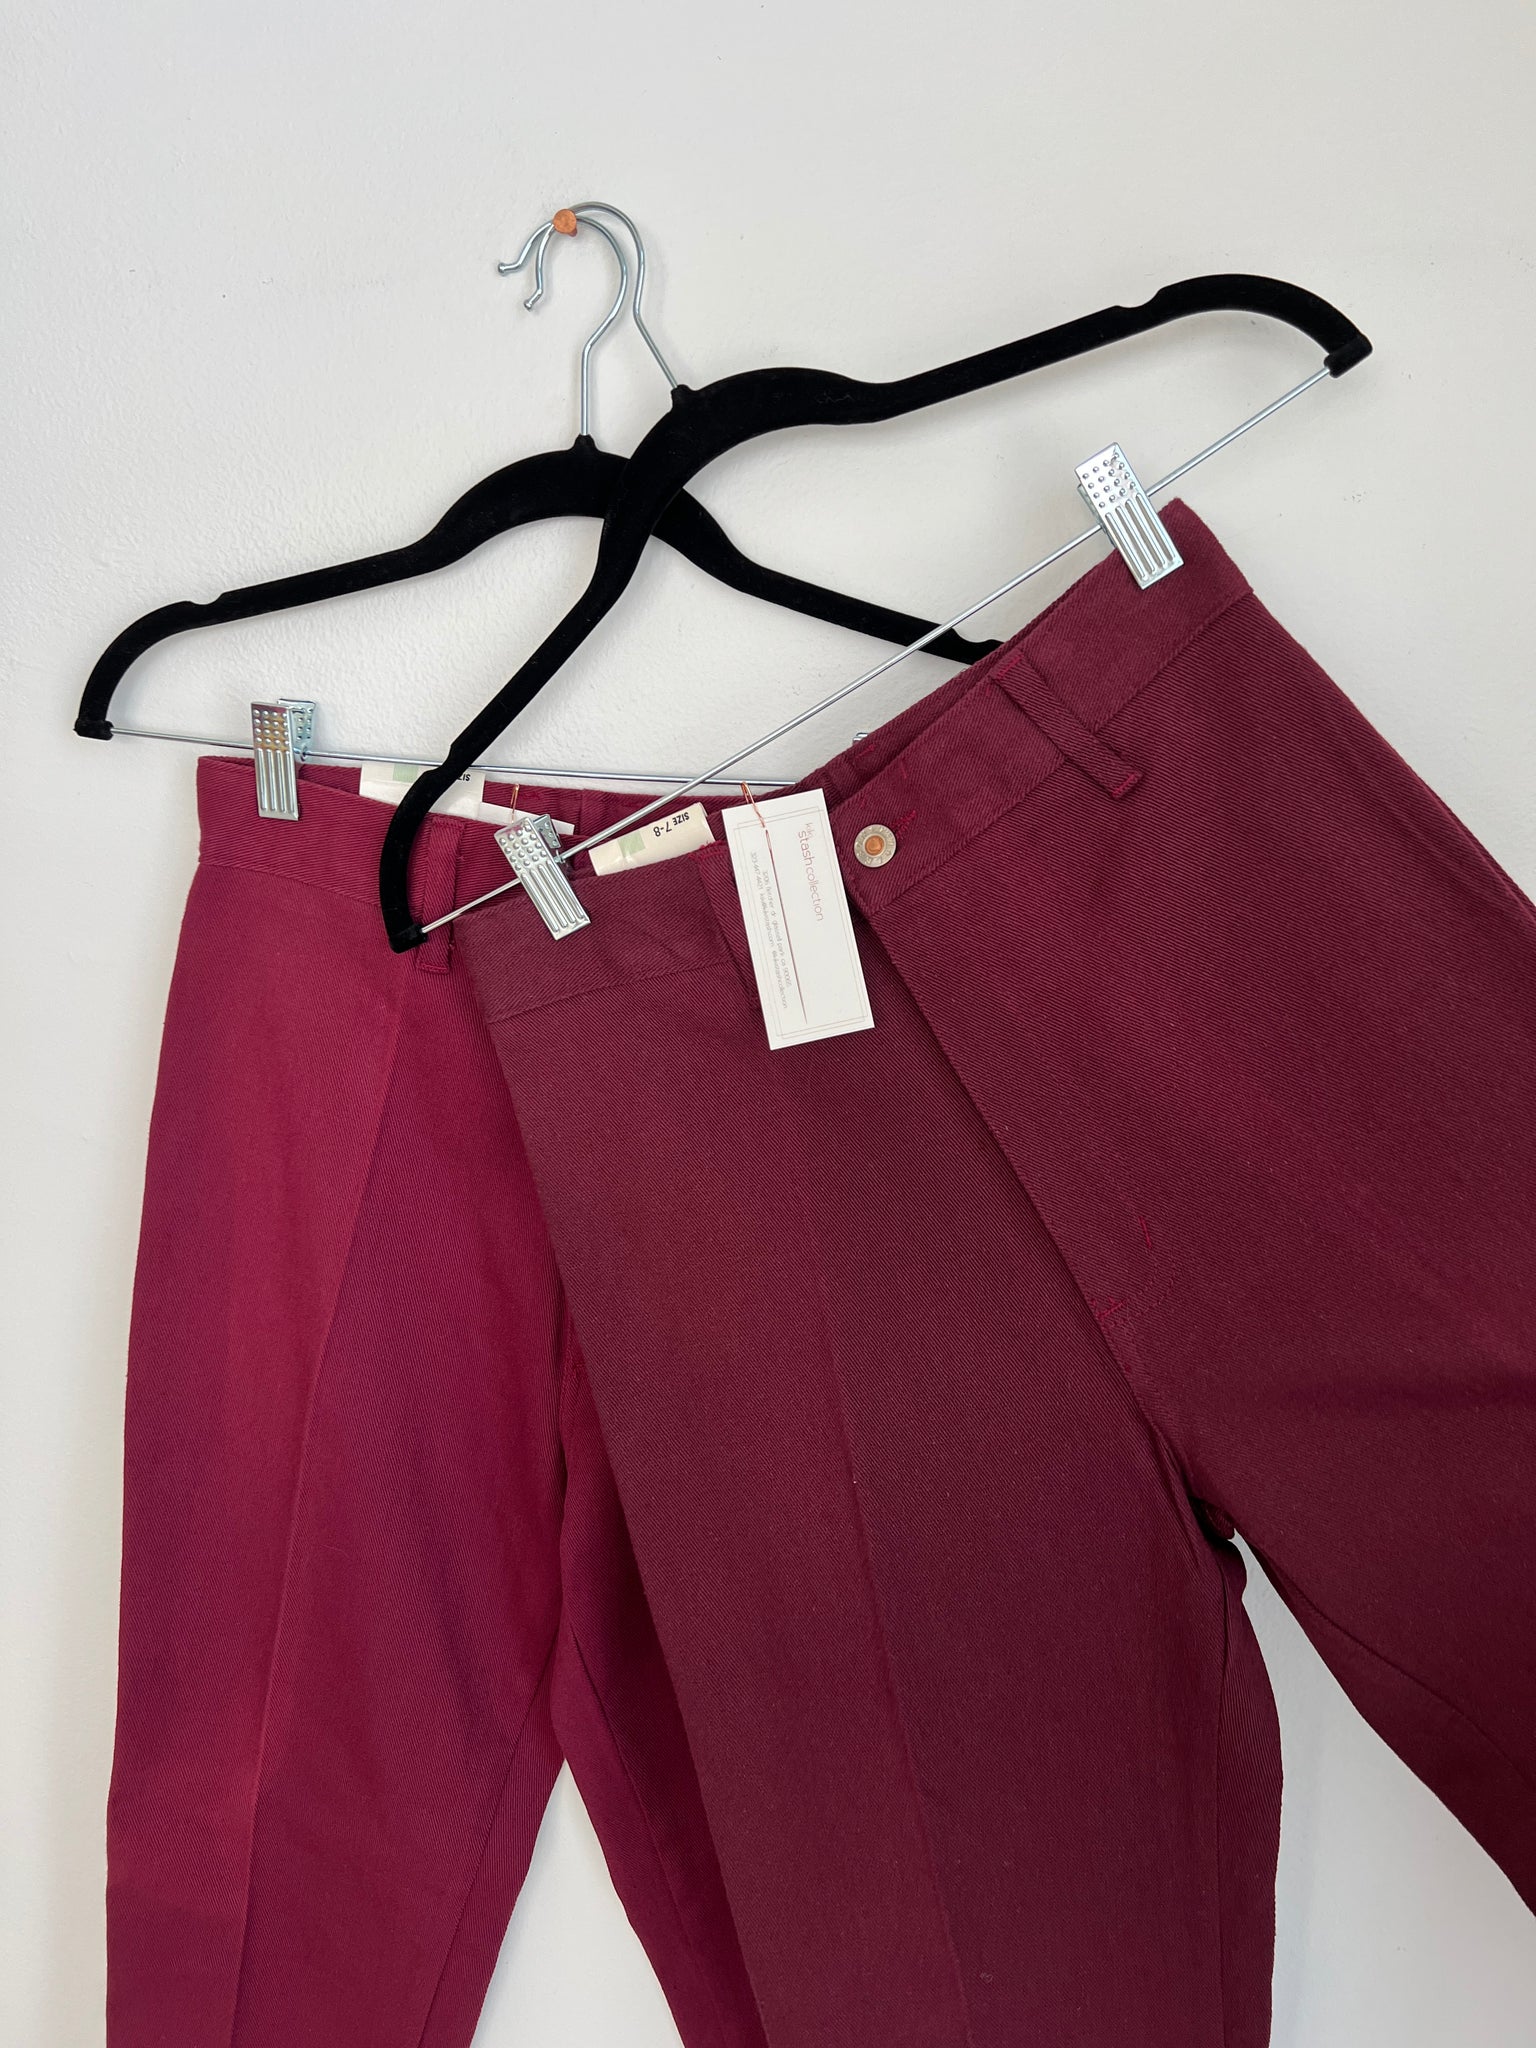 1980s MULTIPLES-PANTS- LeBon maroon high waisted stretch jeans